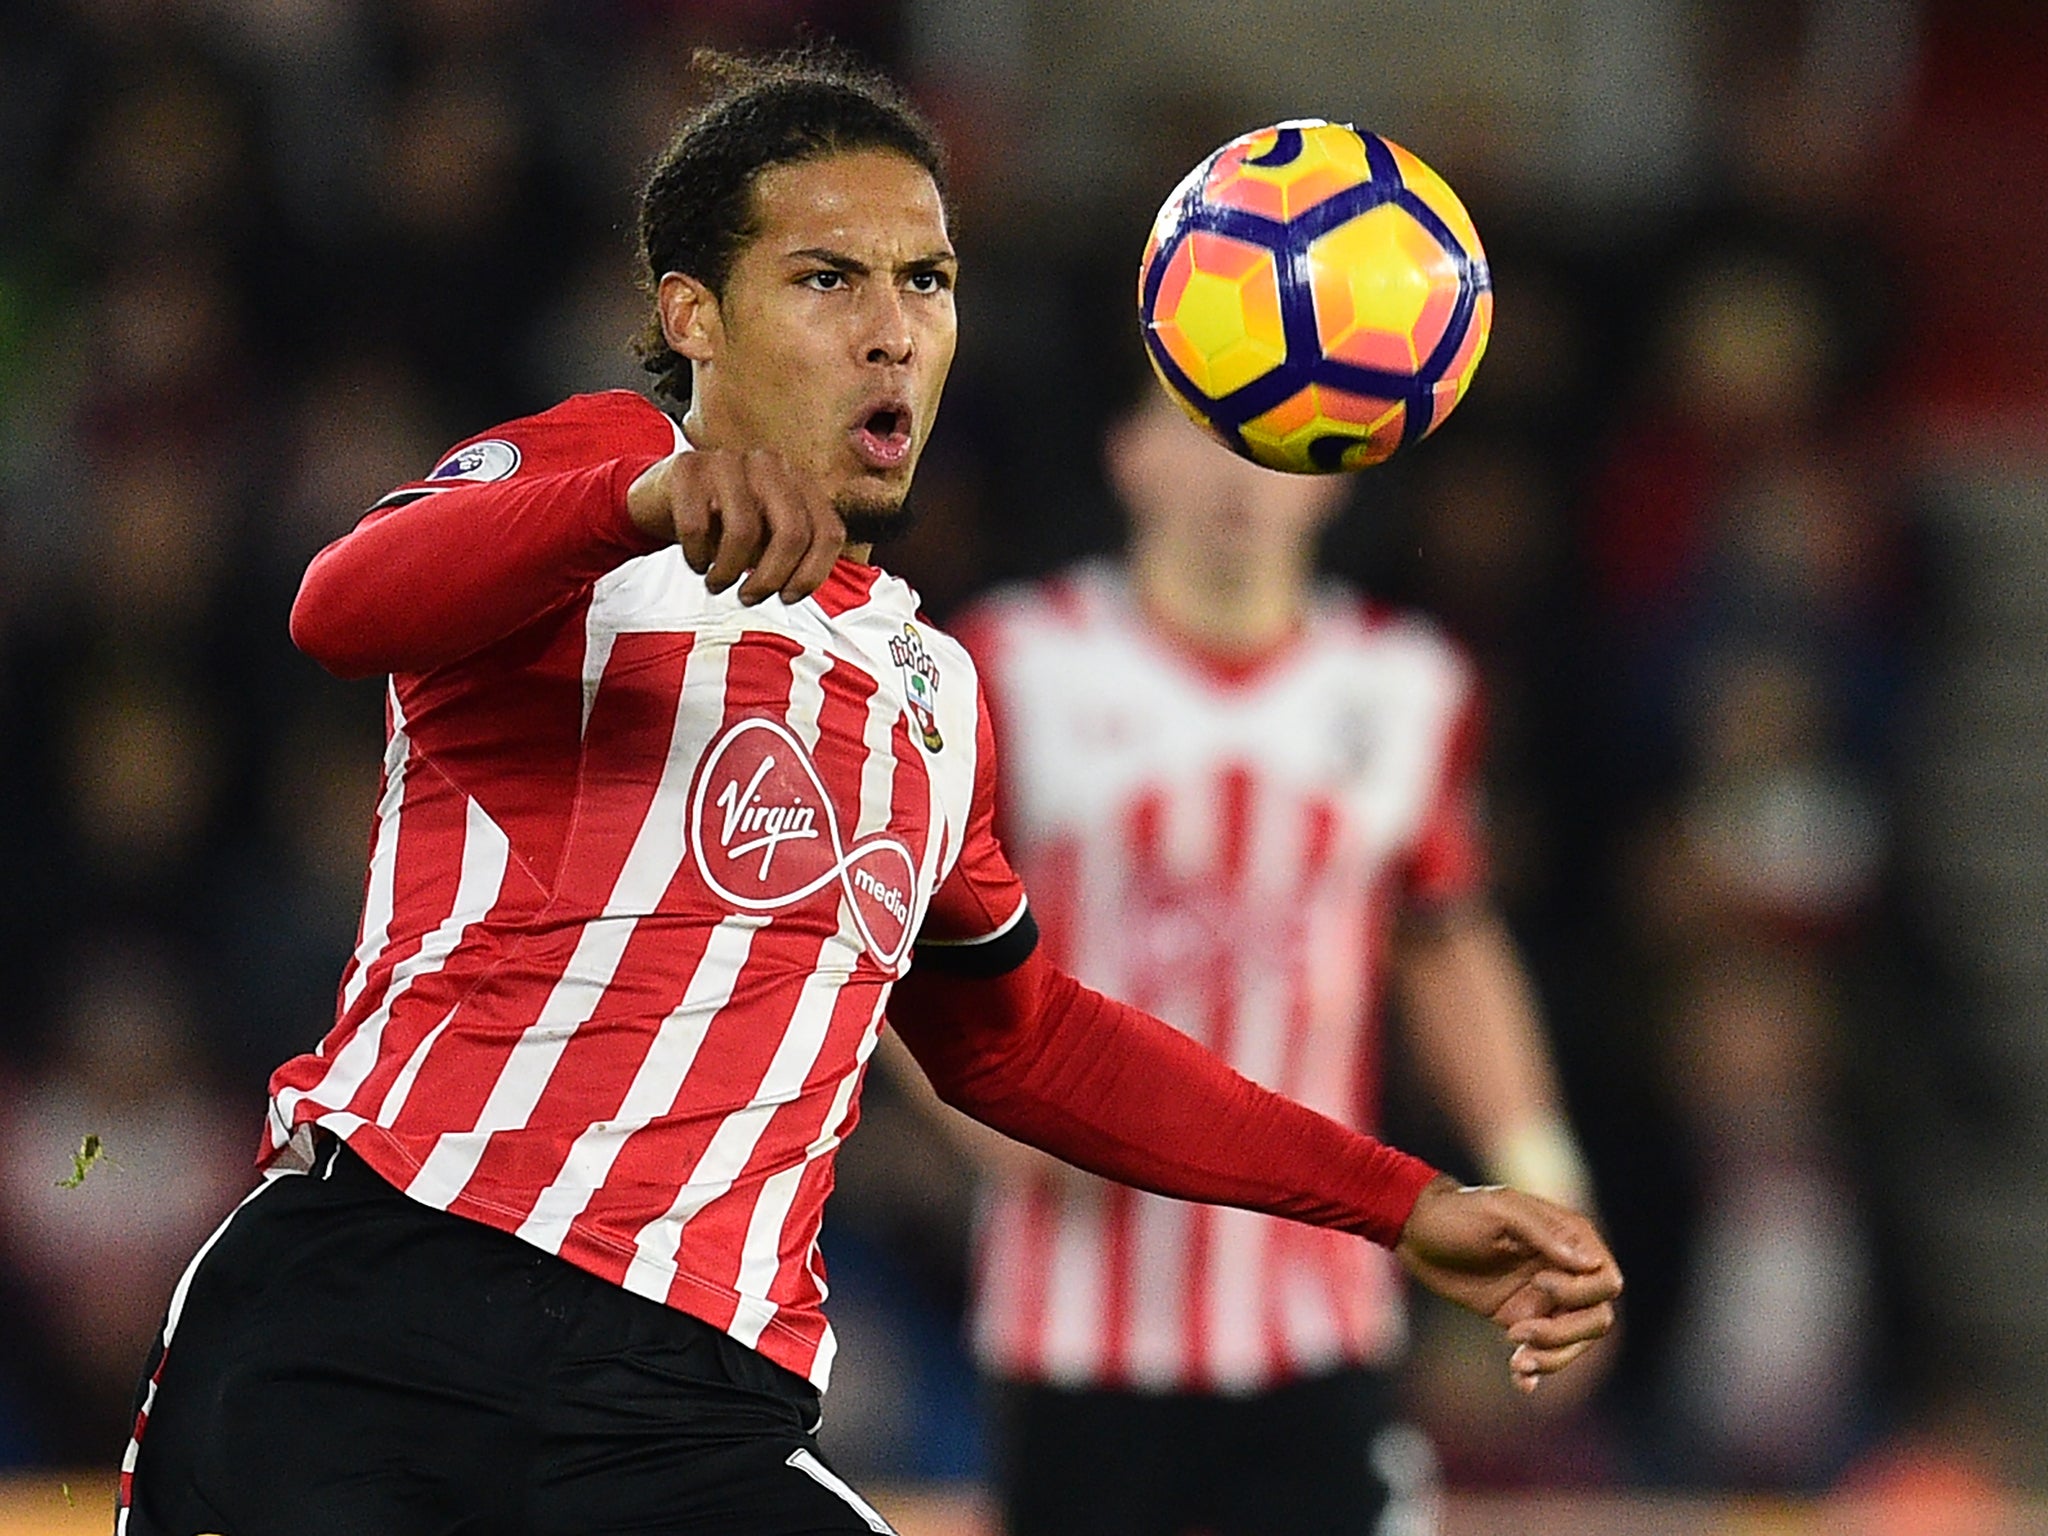 Virgil van Dijk would not solve Liverpool's deep-rooted problems in defence